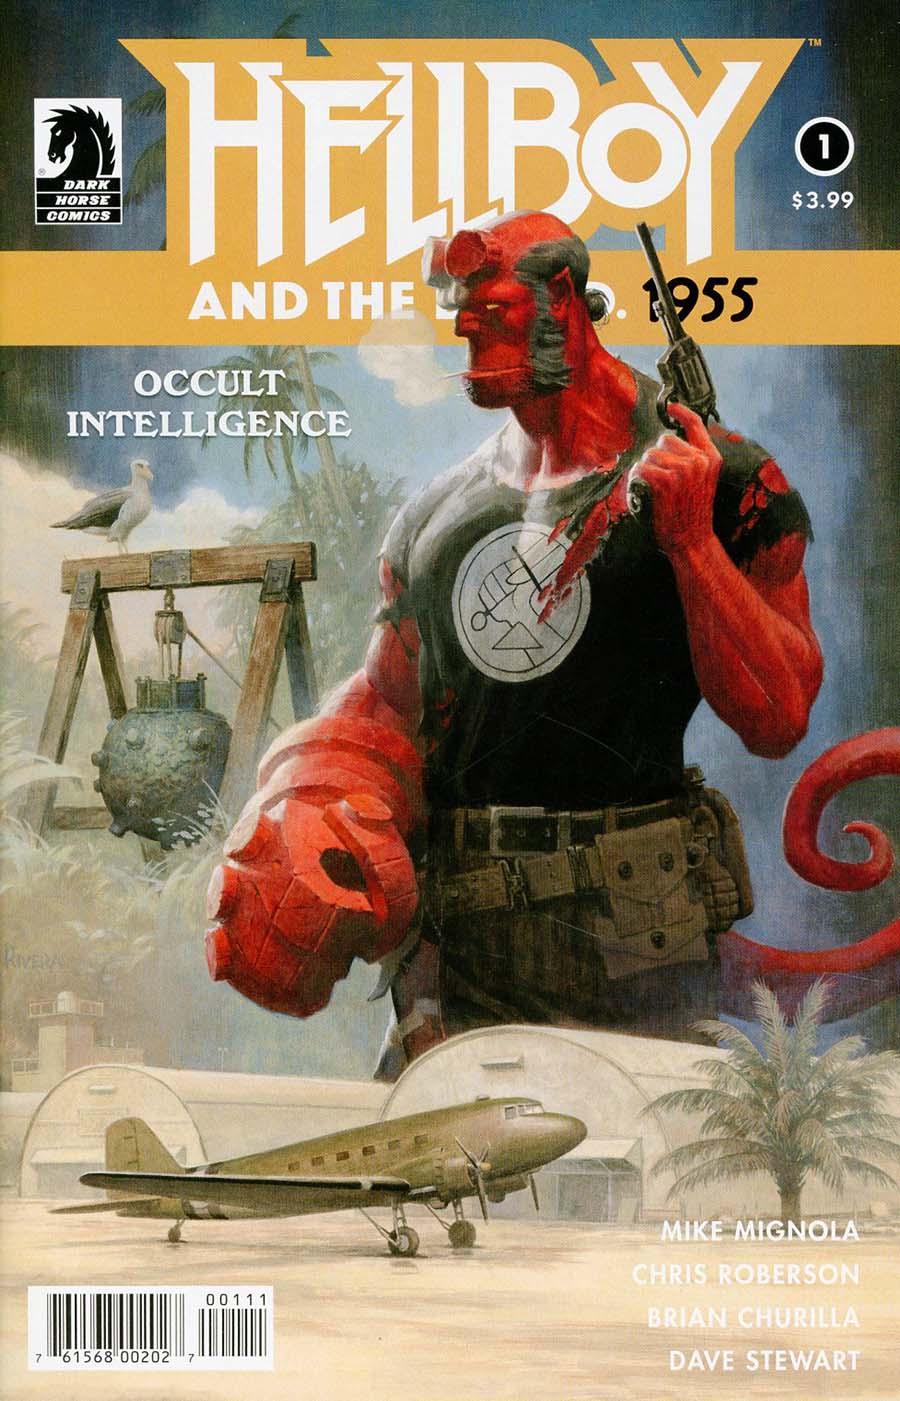 Hellboy And The BPRD 1955 Occult Intelligence Vol. 1 #1